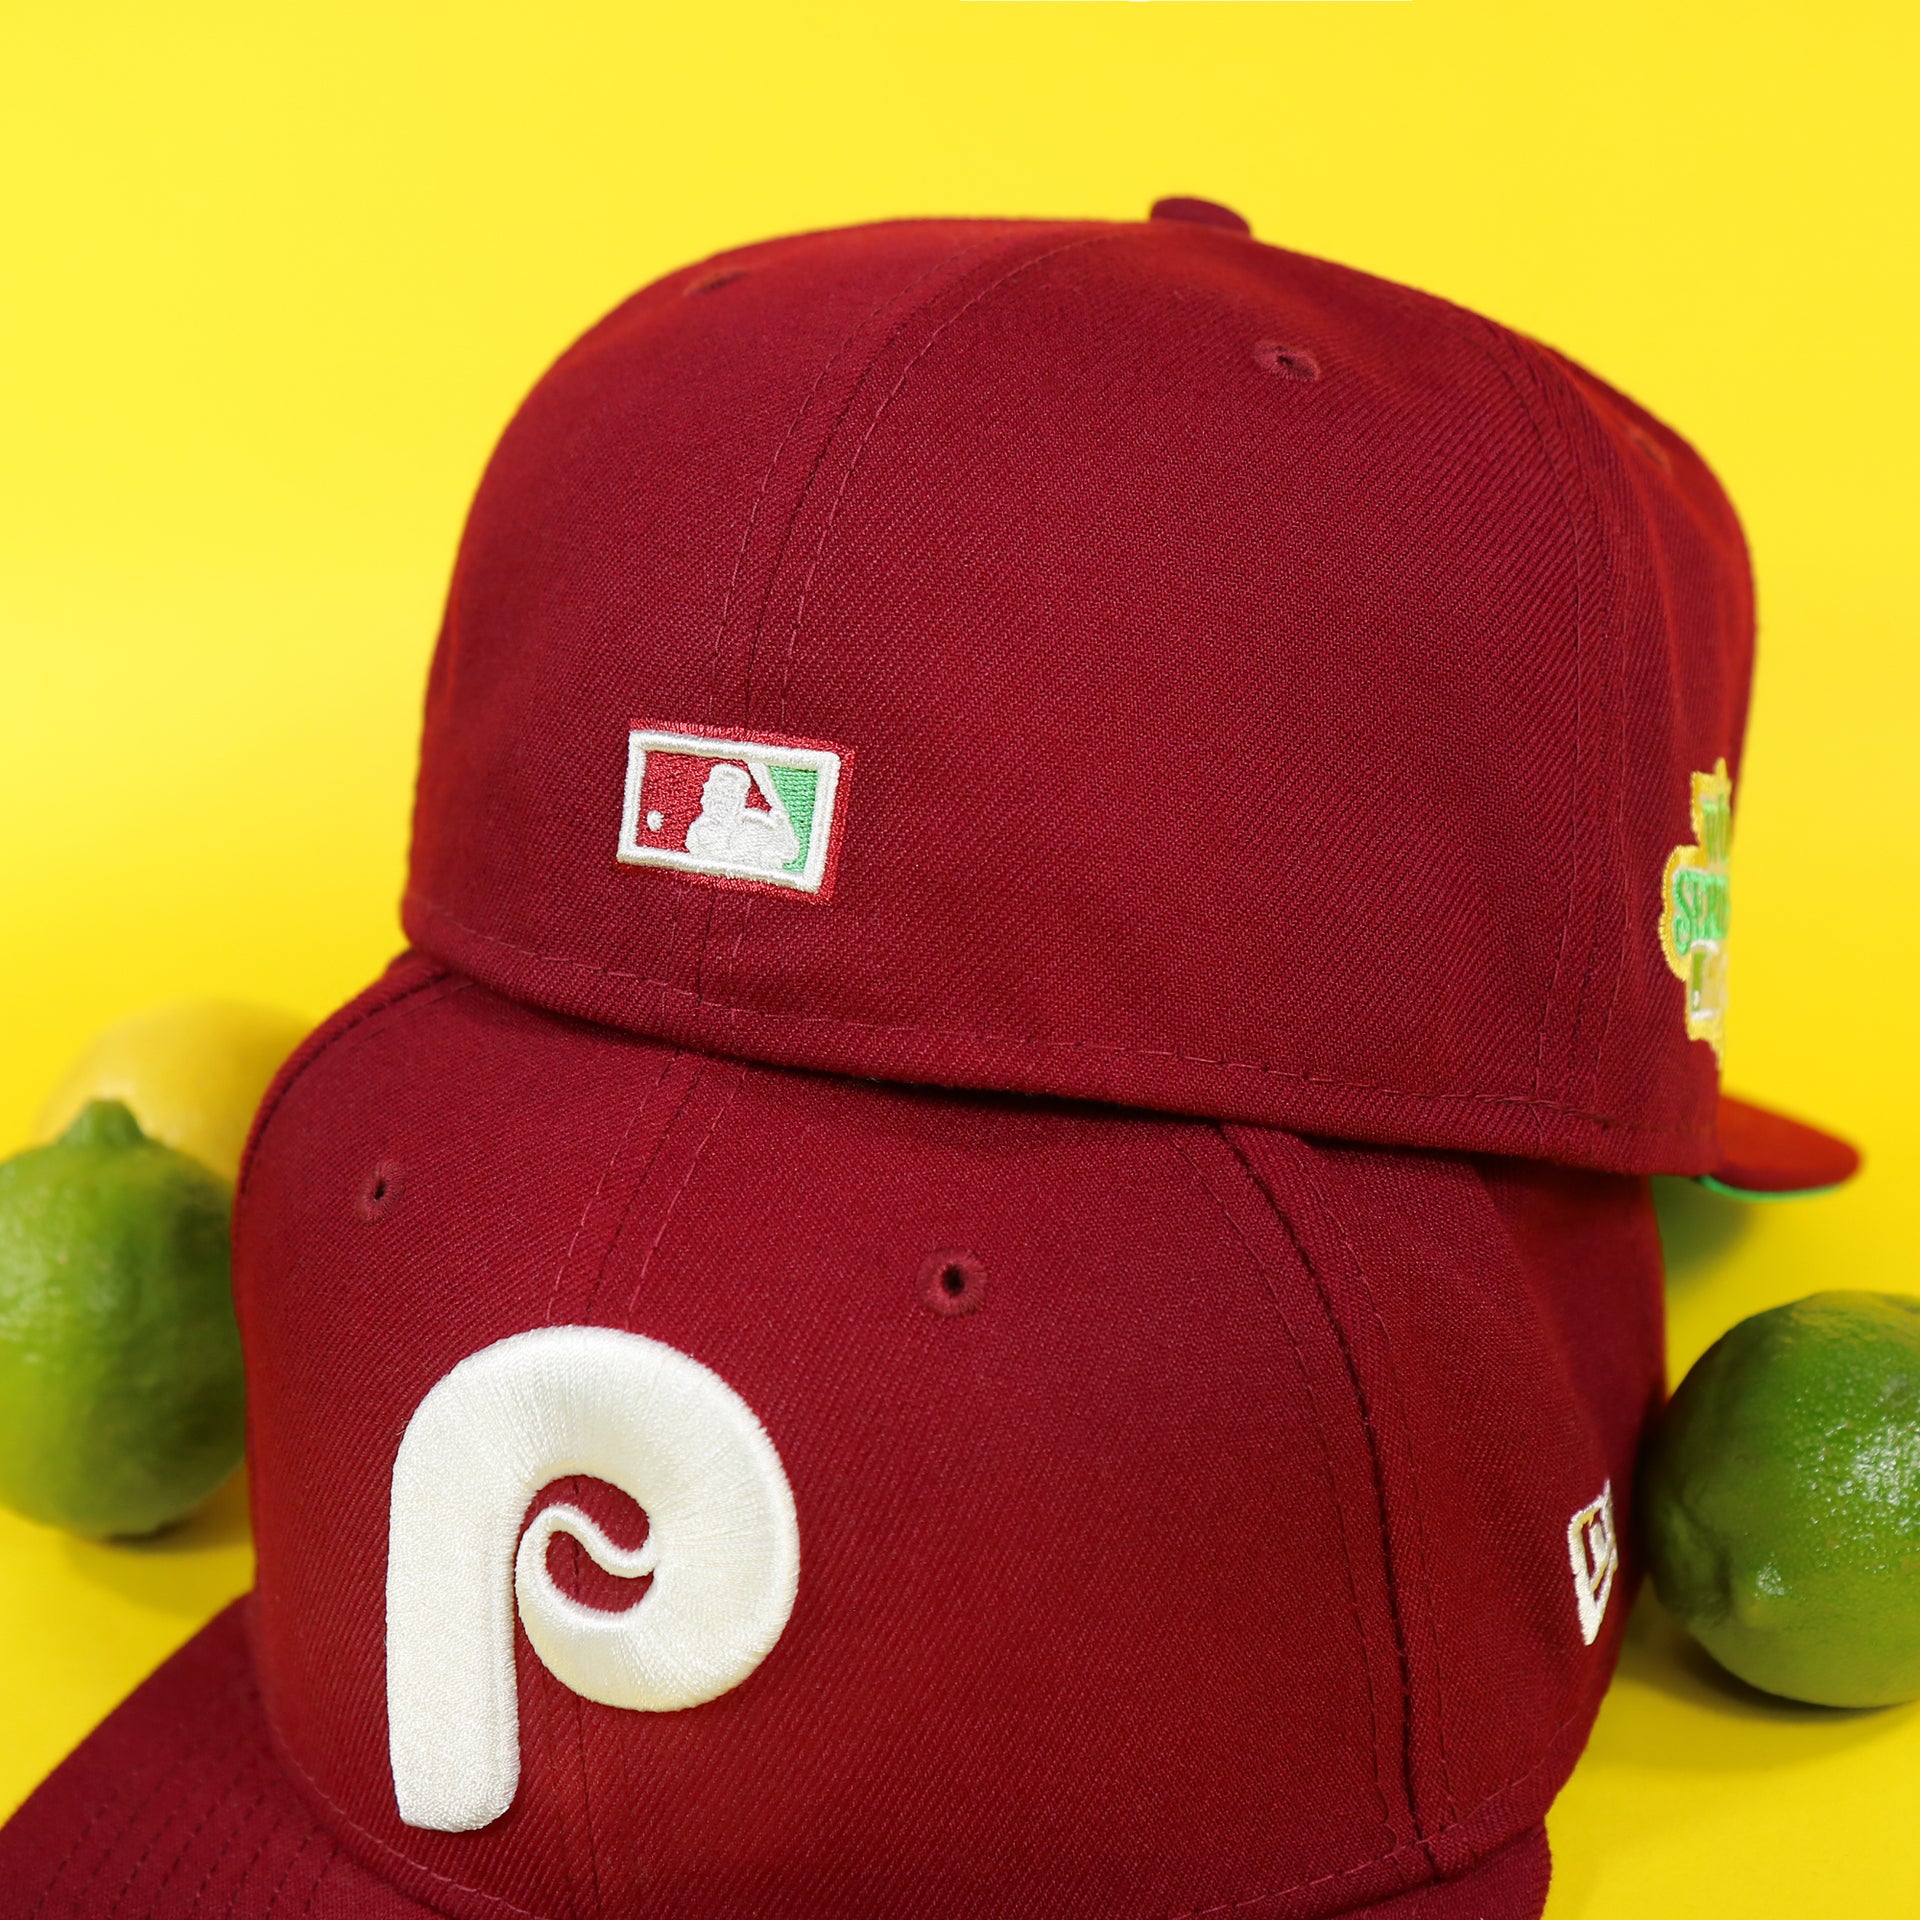 Cooperstown Batterman logo on the back of the Philadelphia Phillies 1980 World Series Side Patch "Citrus Pop" Green UV 59Fifty Fitted Cap